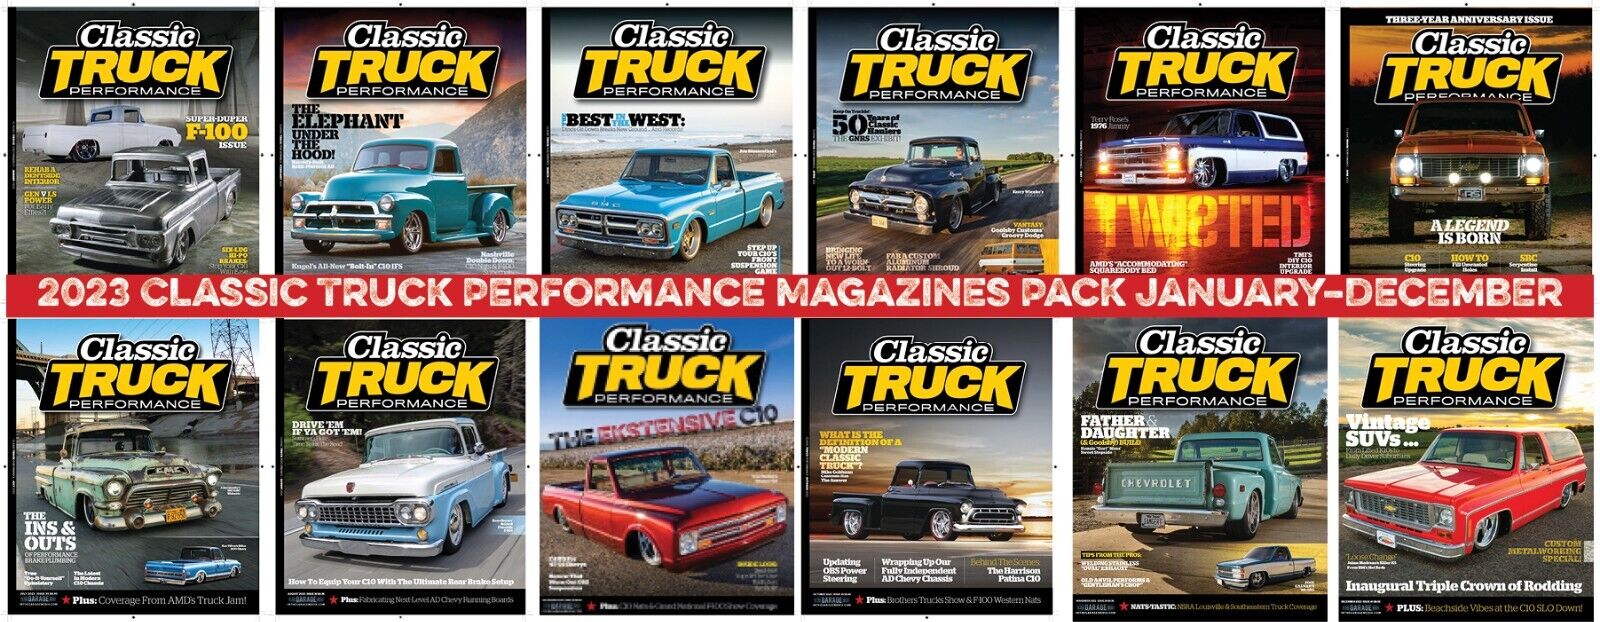 Classic Truck Performance Magazine January - December 2023 Pack of all 12 issues